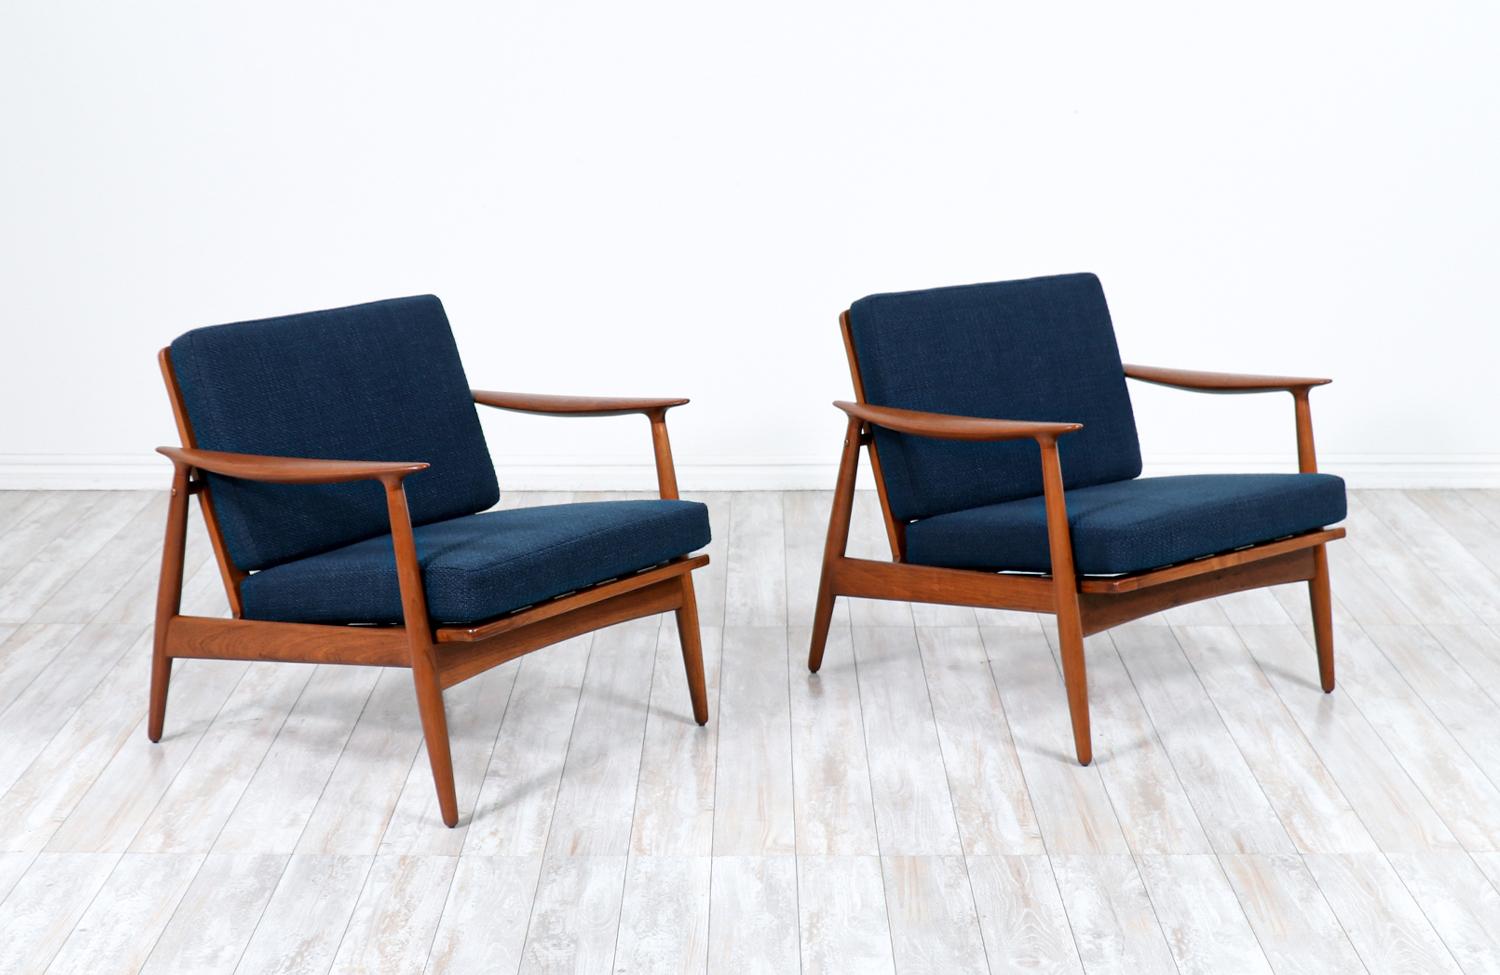 Danish Modern Sculpted Teak Lounge Chairs by John Bone.

________________________________________

Transforming a piece of Mid-Century Modern furniture is like bringing history back to life, and we take this journey with passion and precision. With